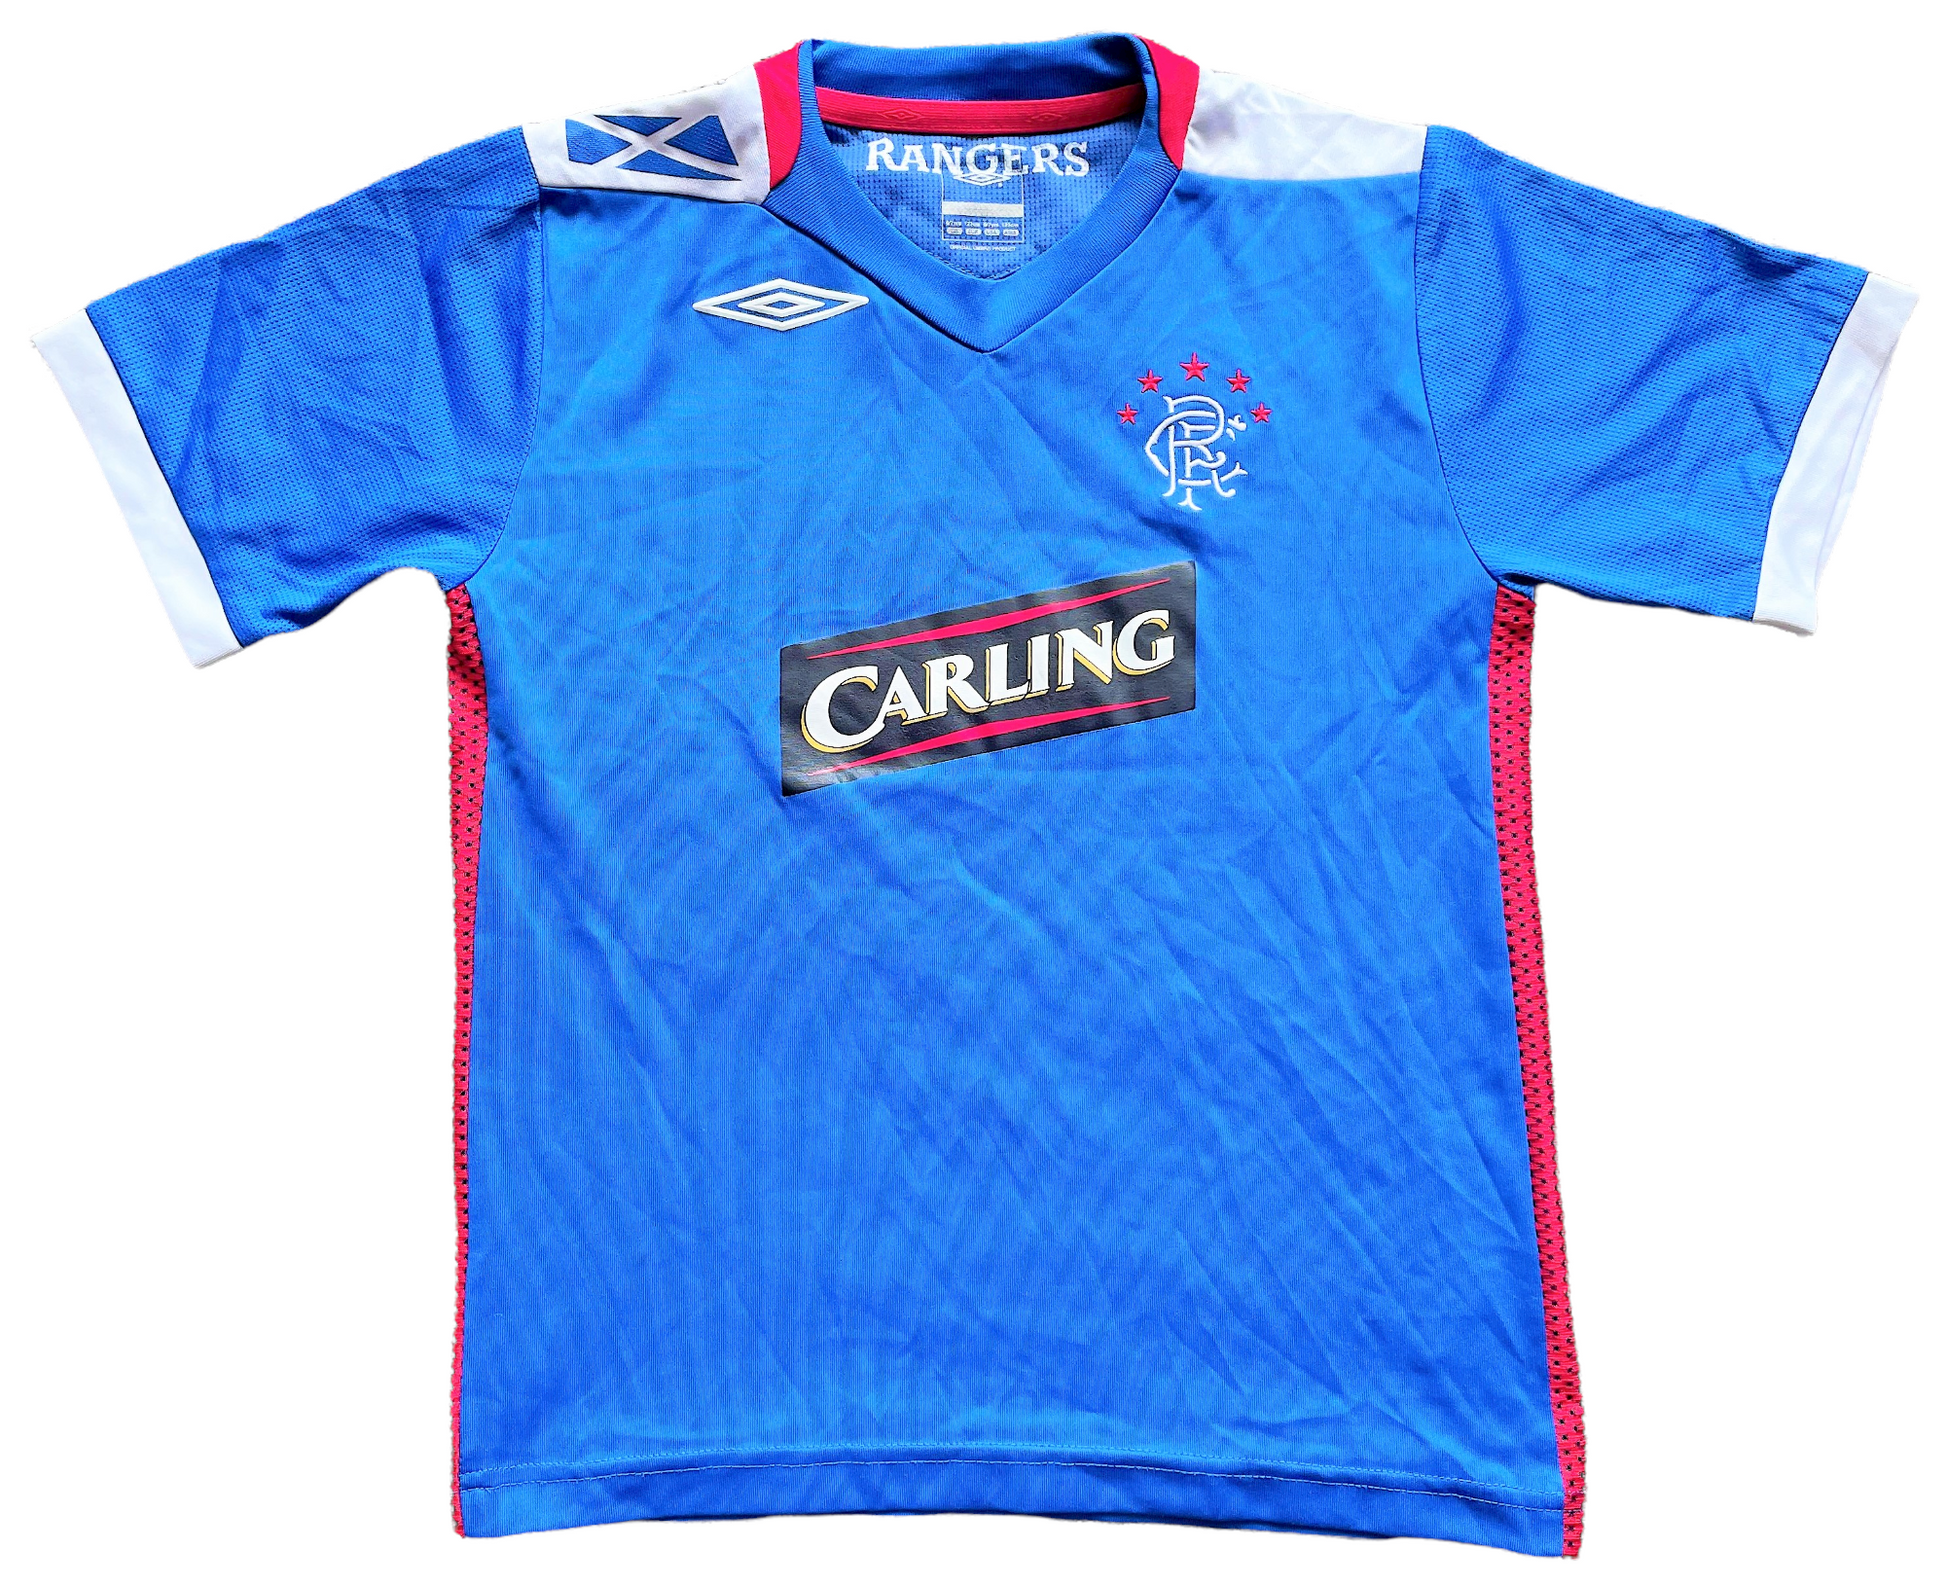 2006-07 Rangers Home Shirt (excellent) Childs age 6 to 7